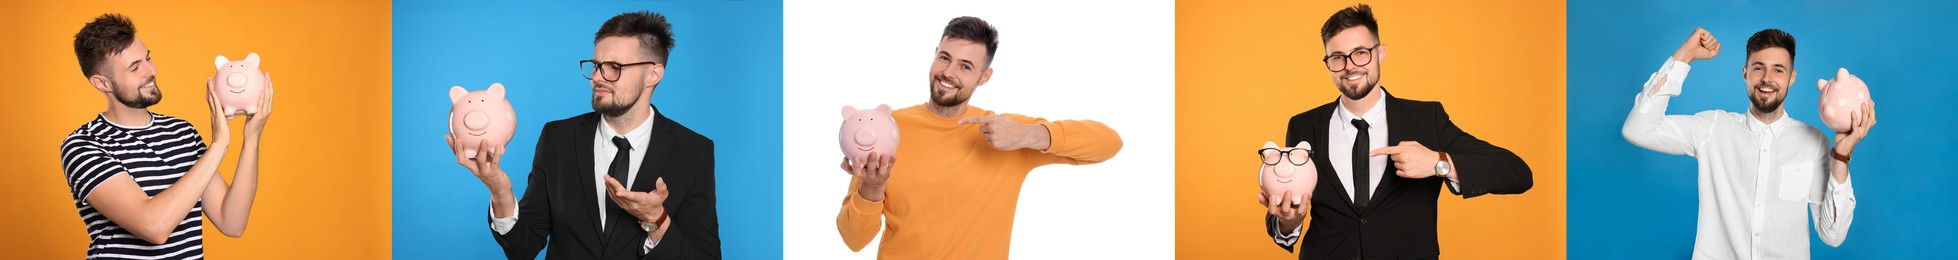 Image of Collage with photos of man holding ceramic piggy banks on different color backgrounds. Banner design